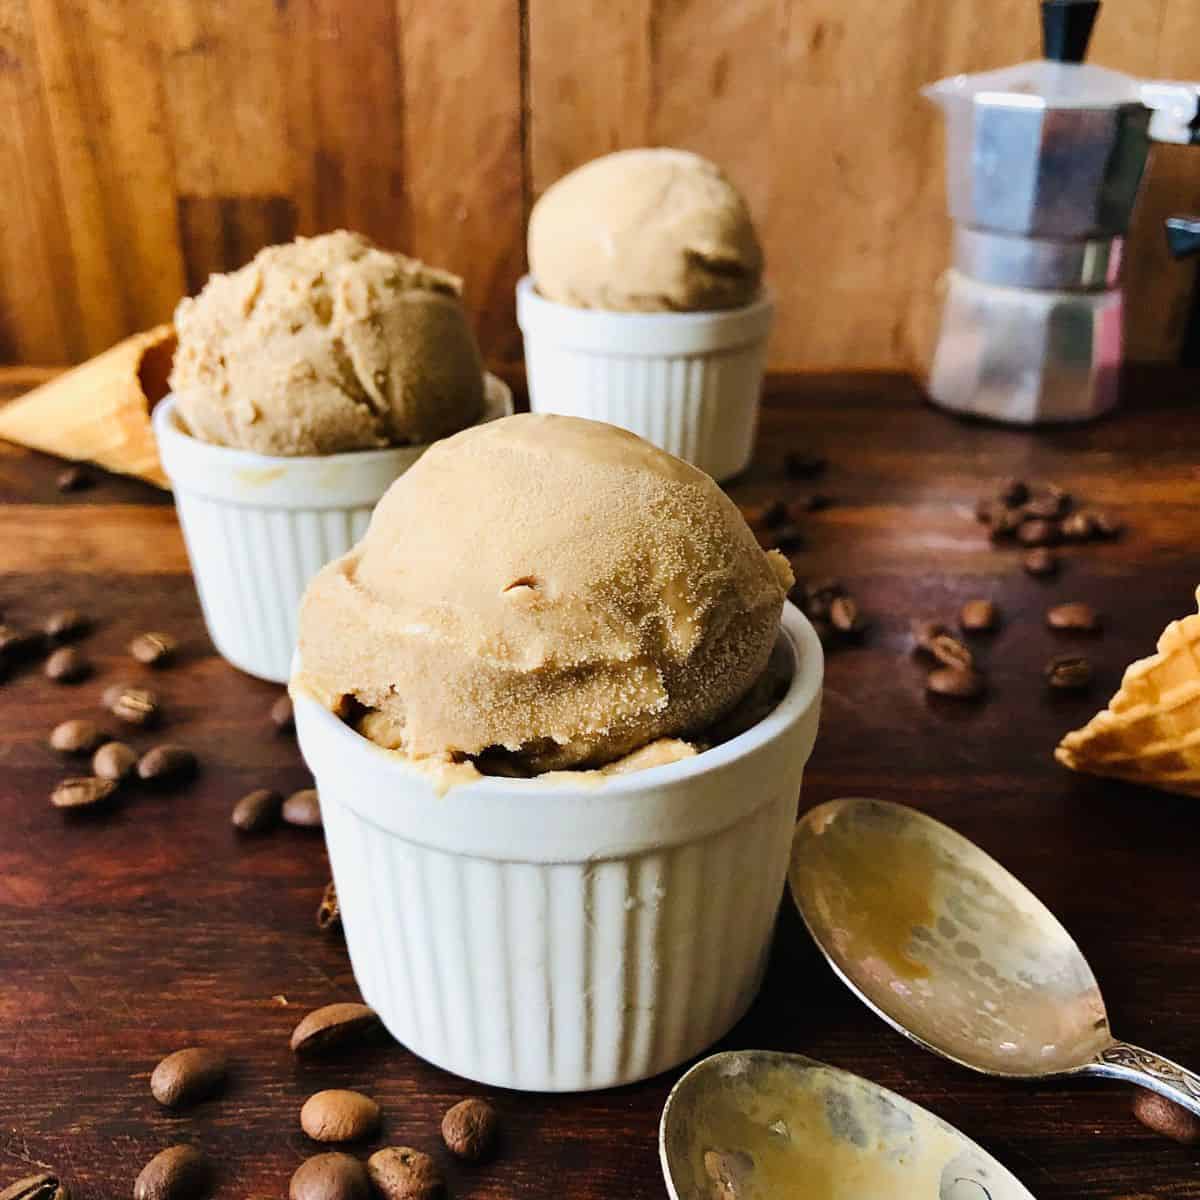 A scoop of coffee ice cream on a small dish.